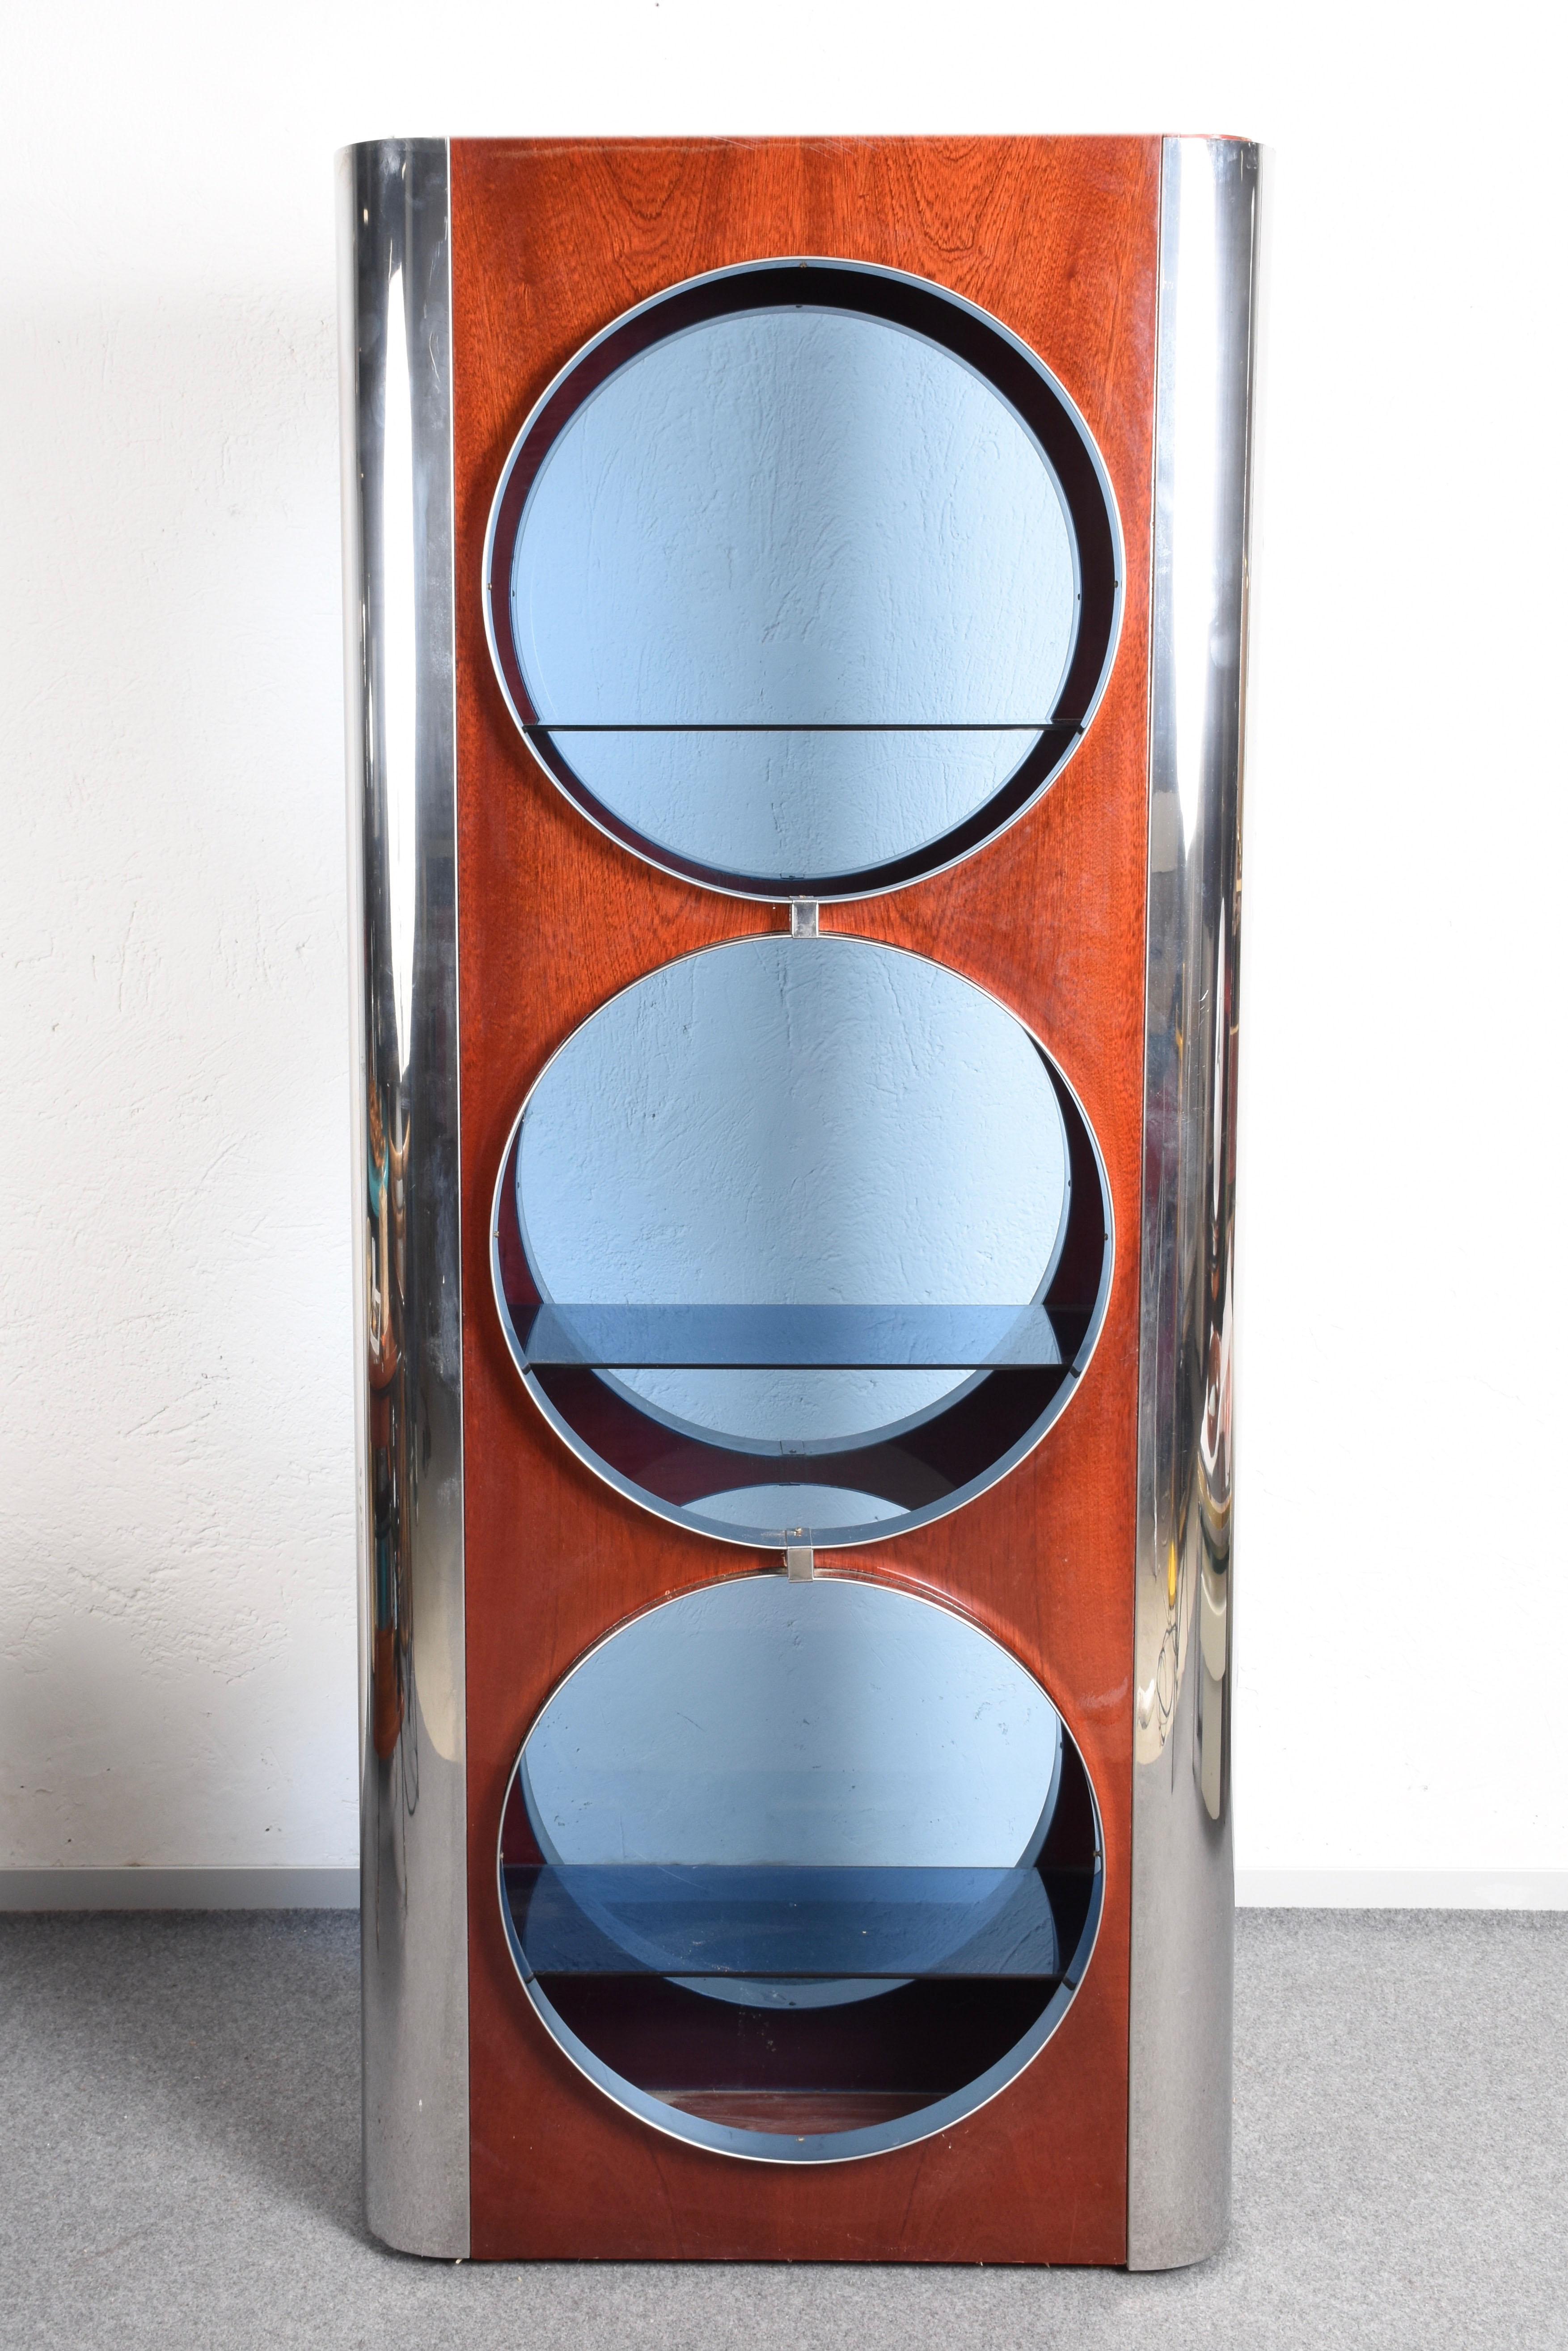 Magnificent Italian showcase-bookcase from the 1980s attributed to Willy Rizzo. 

It is made of stainless steel, mahogany and the internal surfaces and the round glass windows on the back of the portholes are smoky blue glass.

In late 1948,